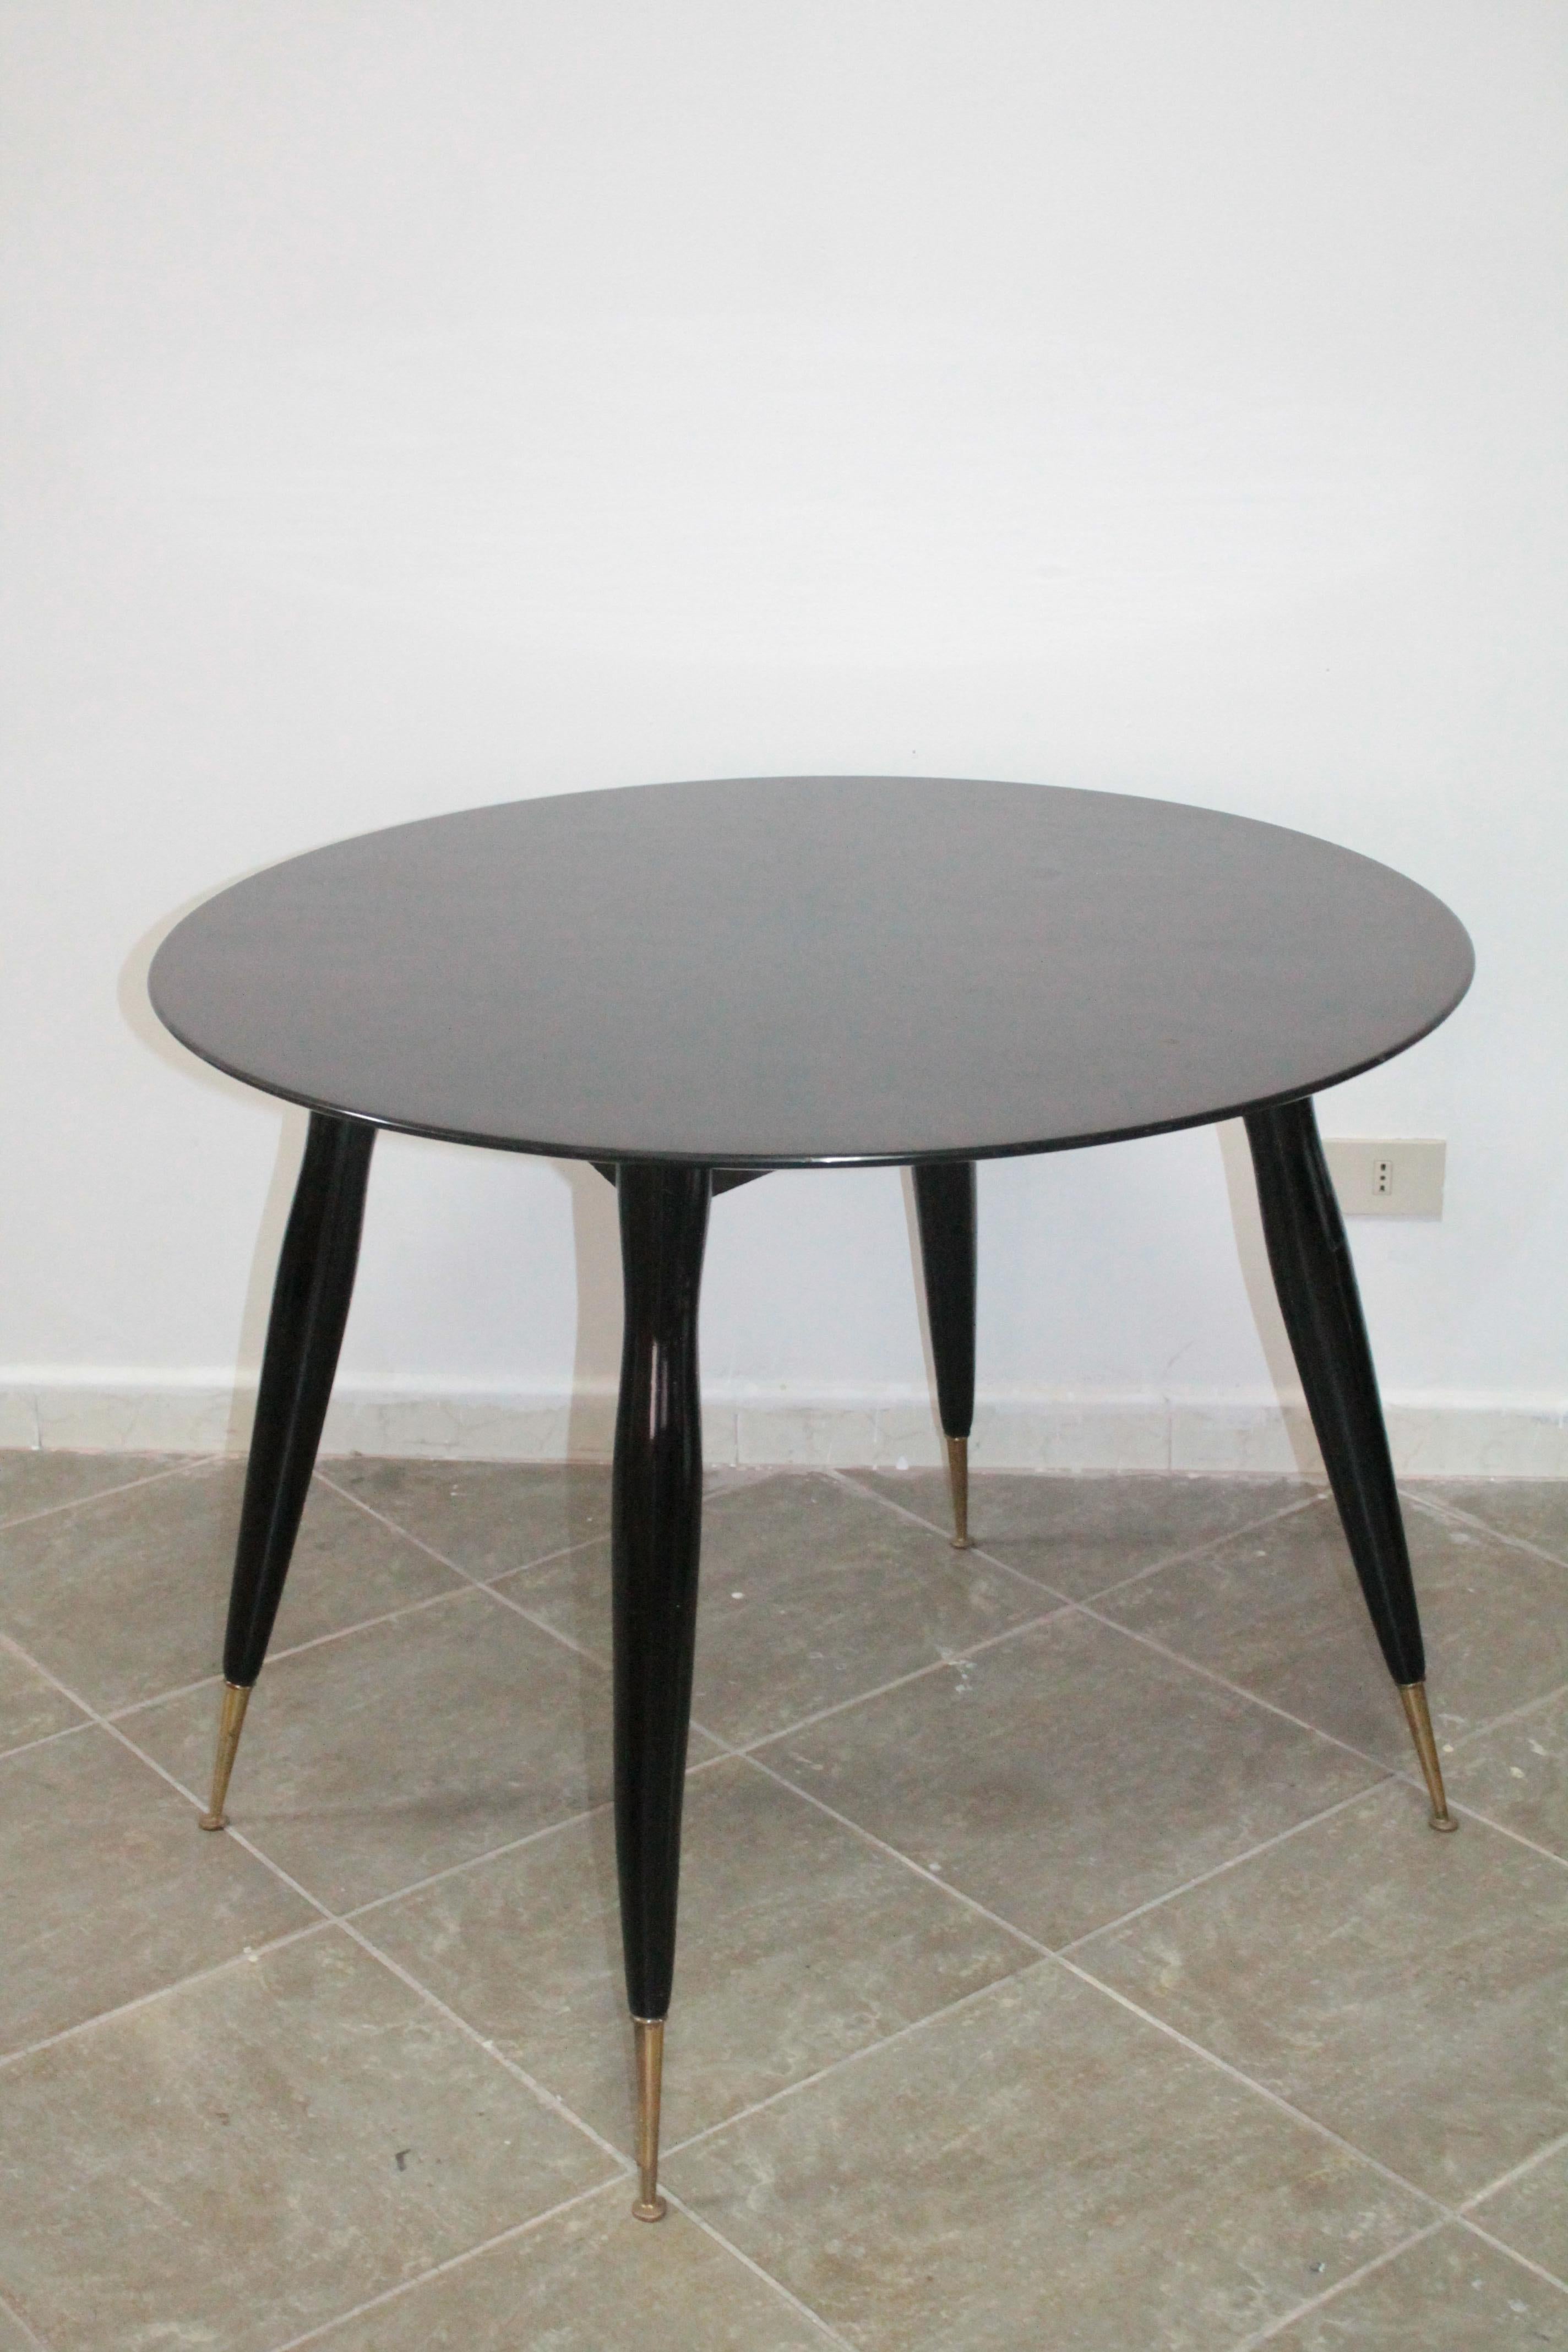 Mid-20th Century Italian Round Dining Table Rosewood in the Style of Gio Ponti, 1950s For Sale